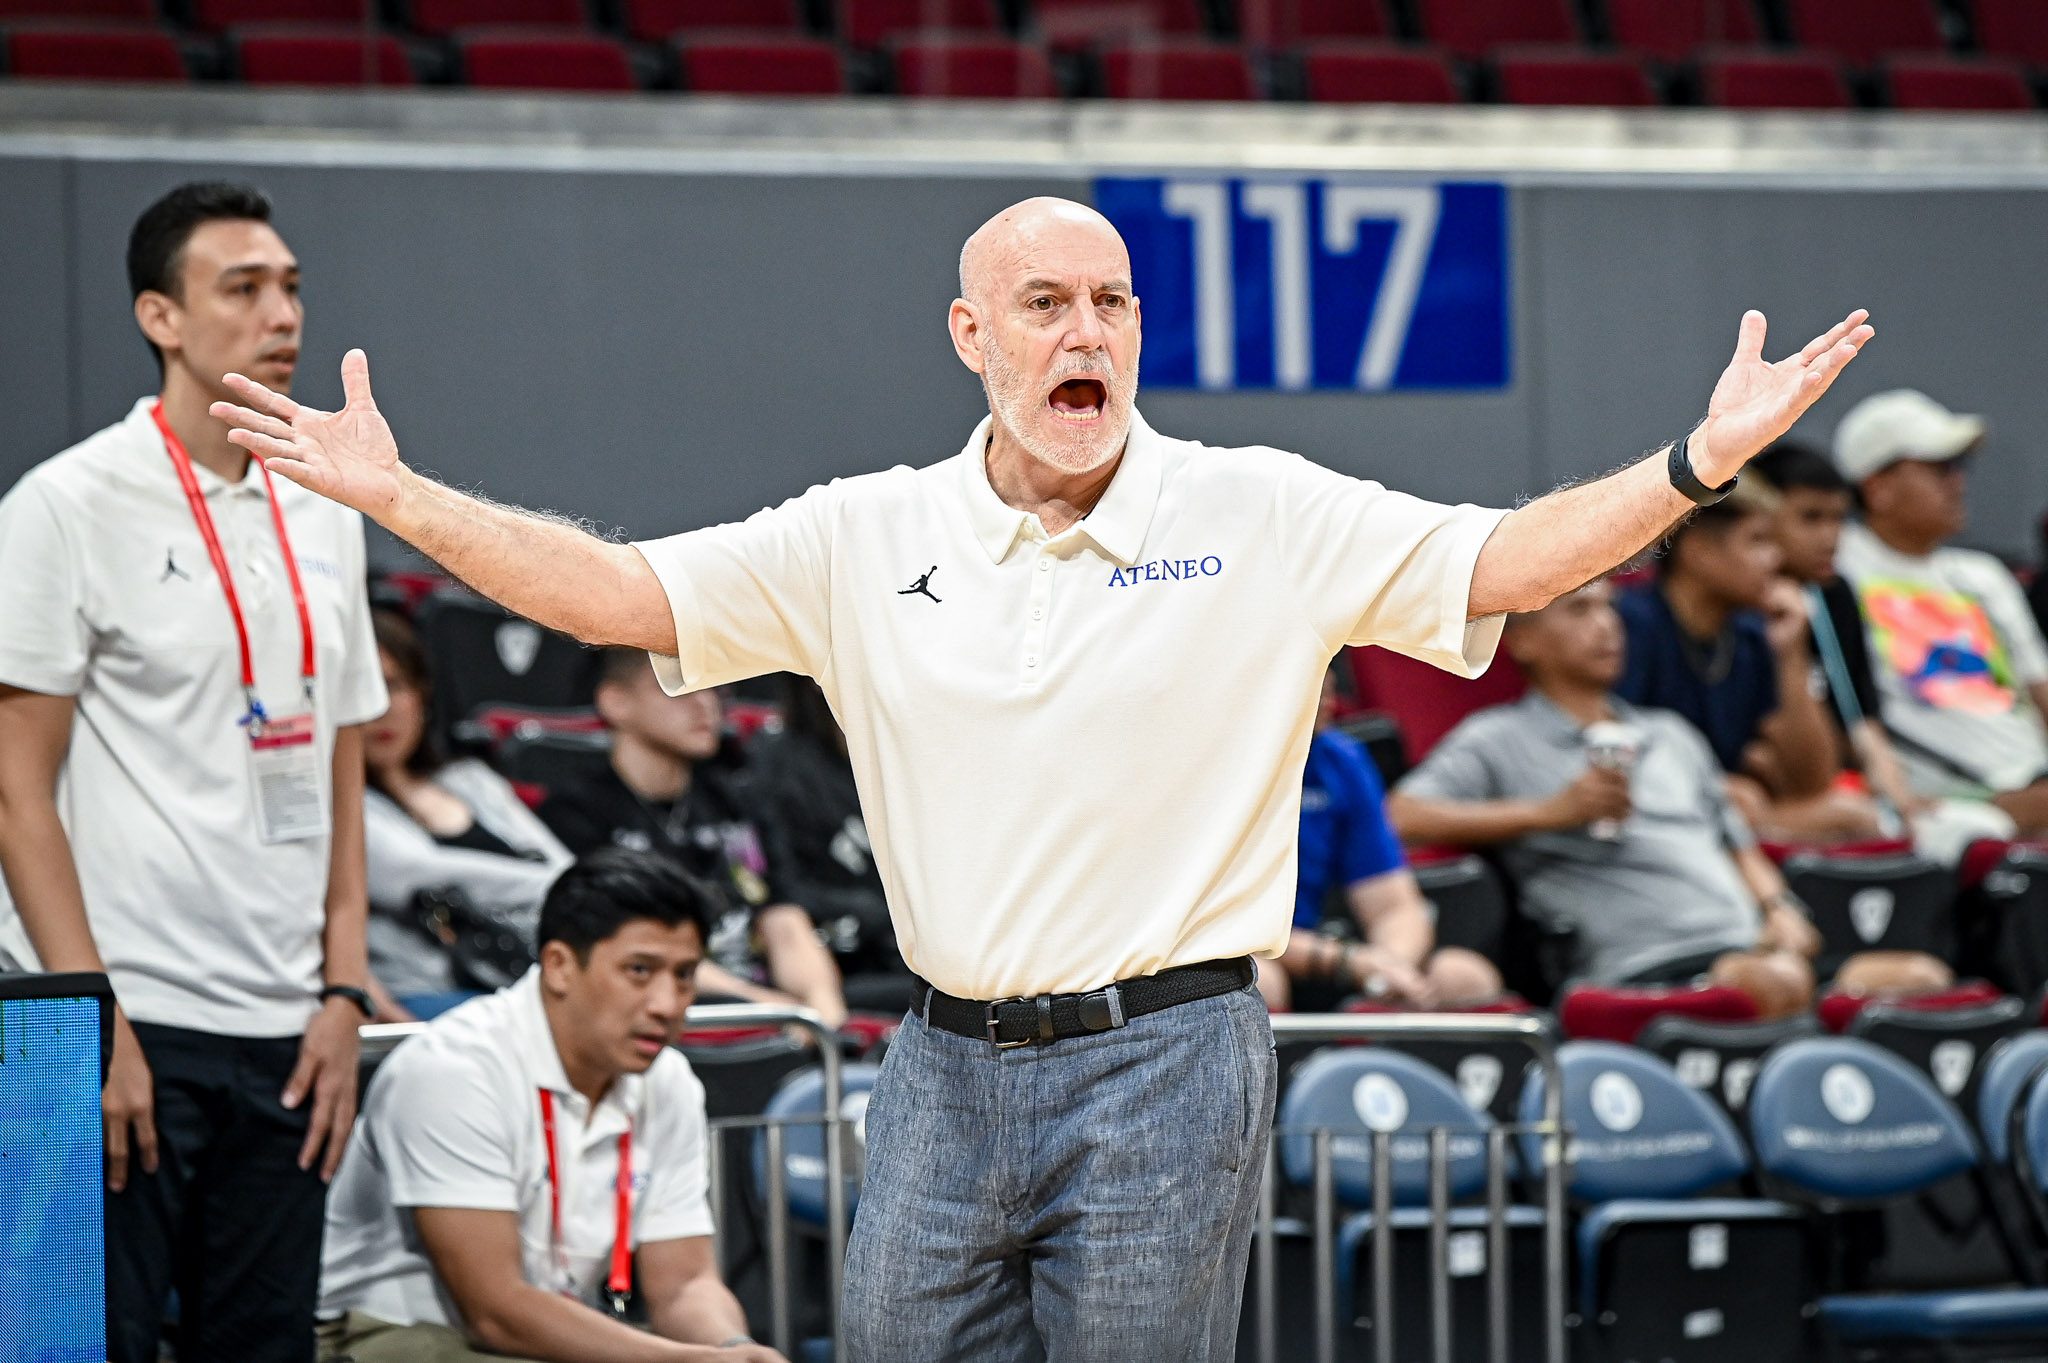 ‘Shameful’ to put UAAP officials under pressure, says Ateneo’s Tab Baldwin